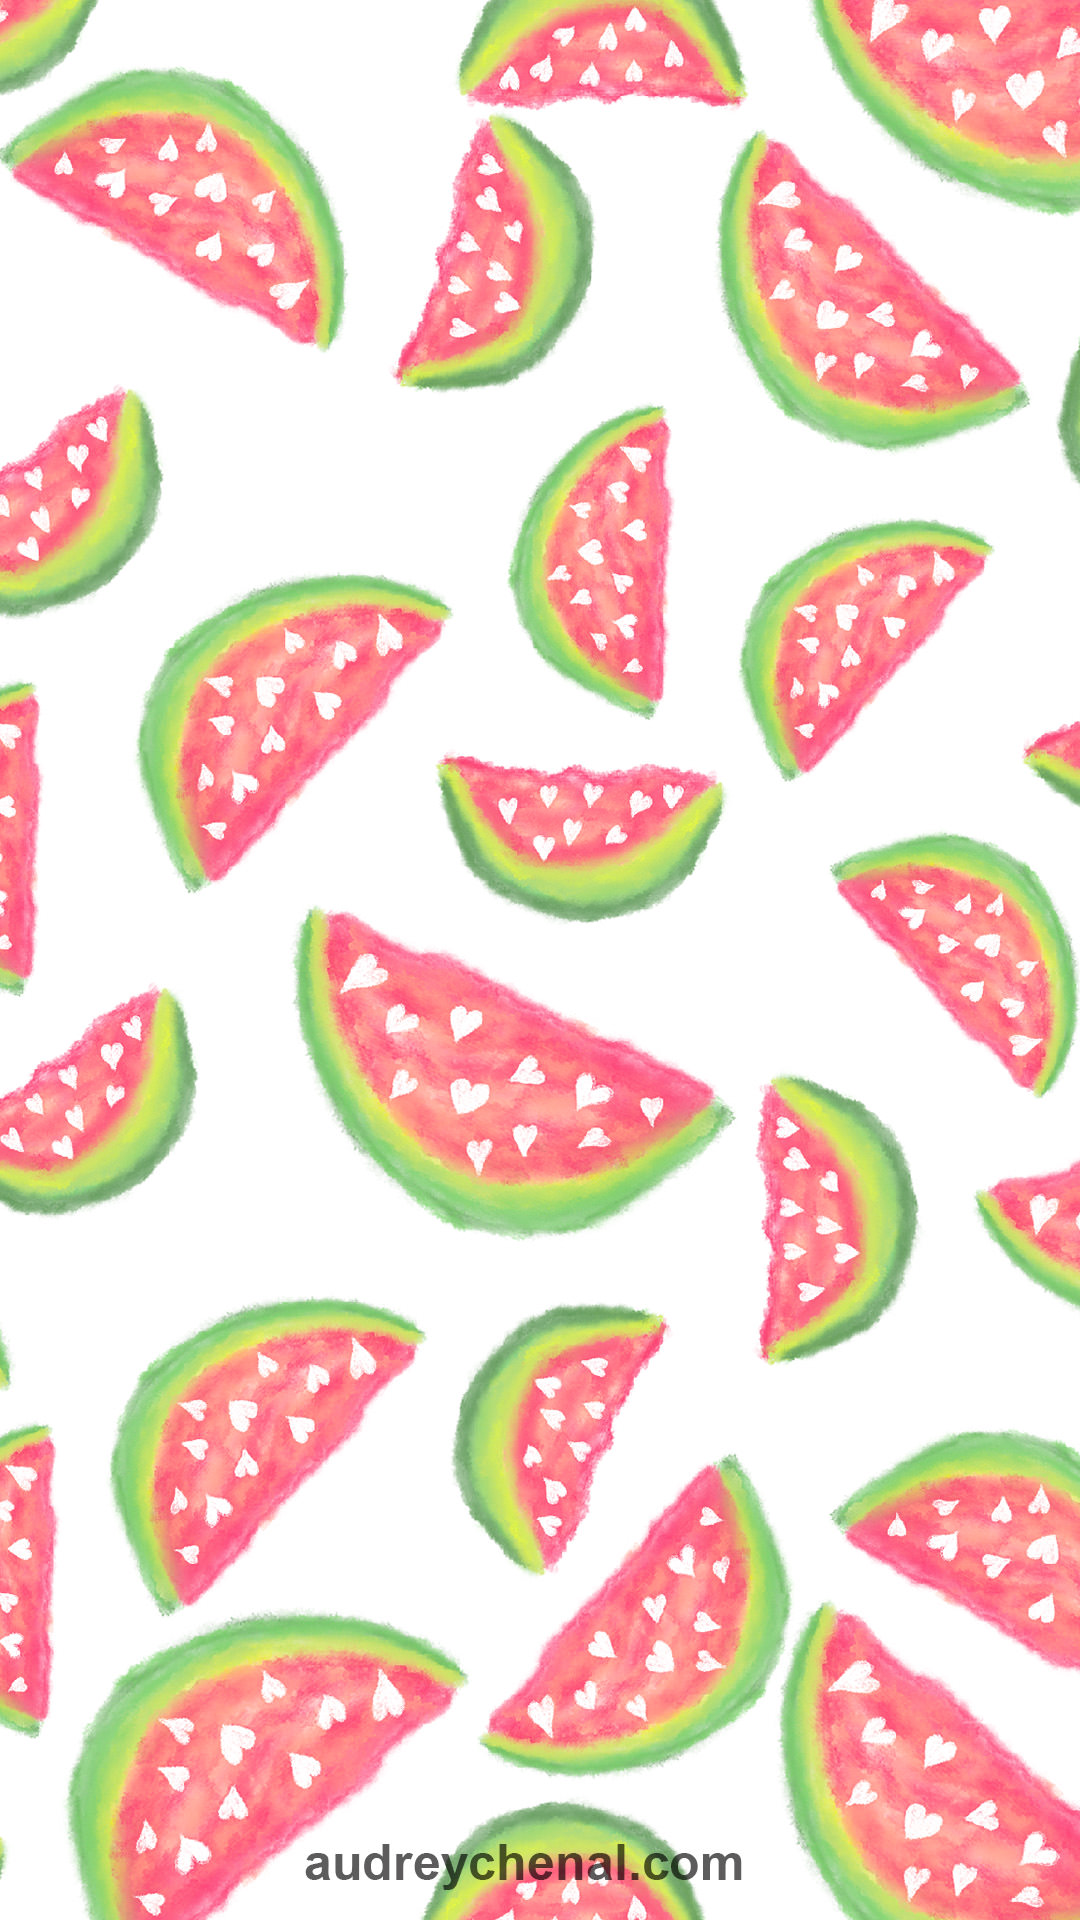 Summer hand painted pink teal watercolor watermelons fruits and hearts pattern wallpaper